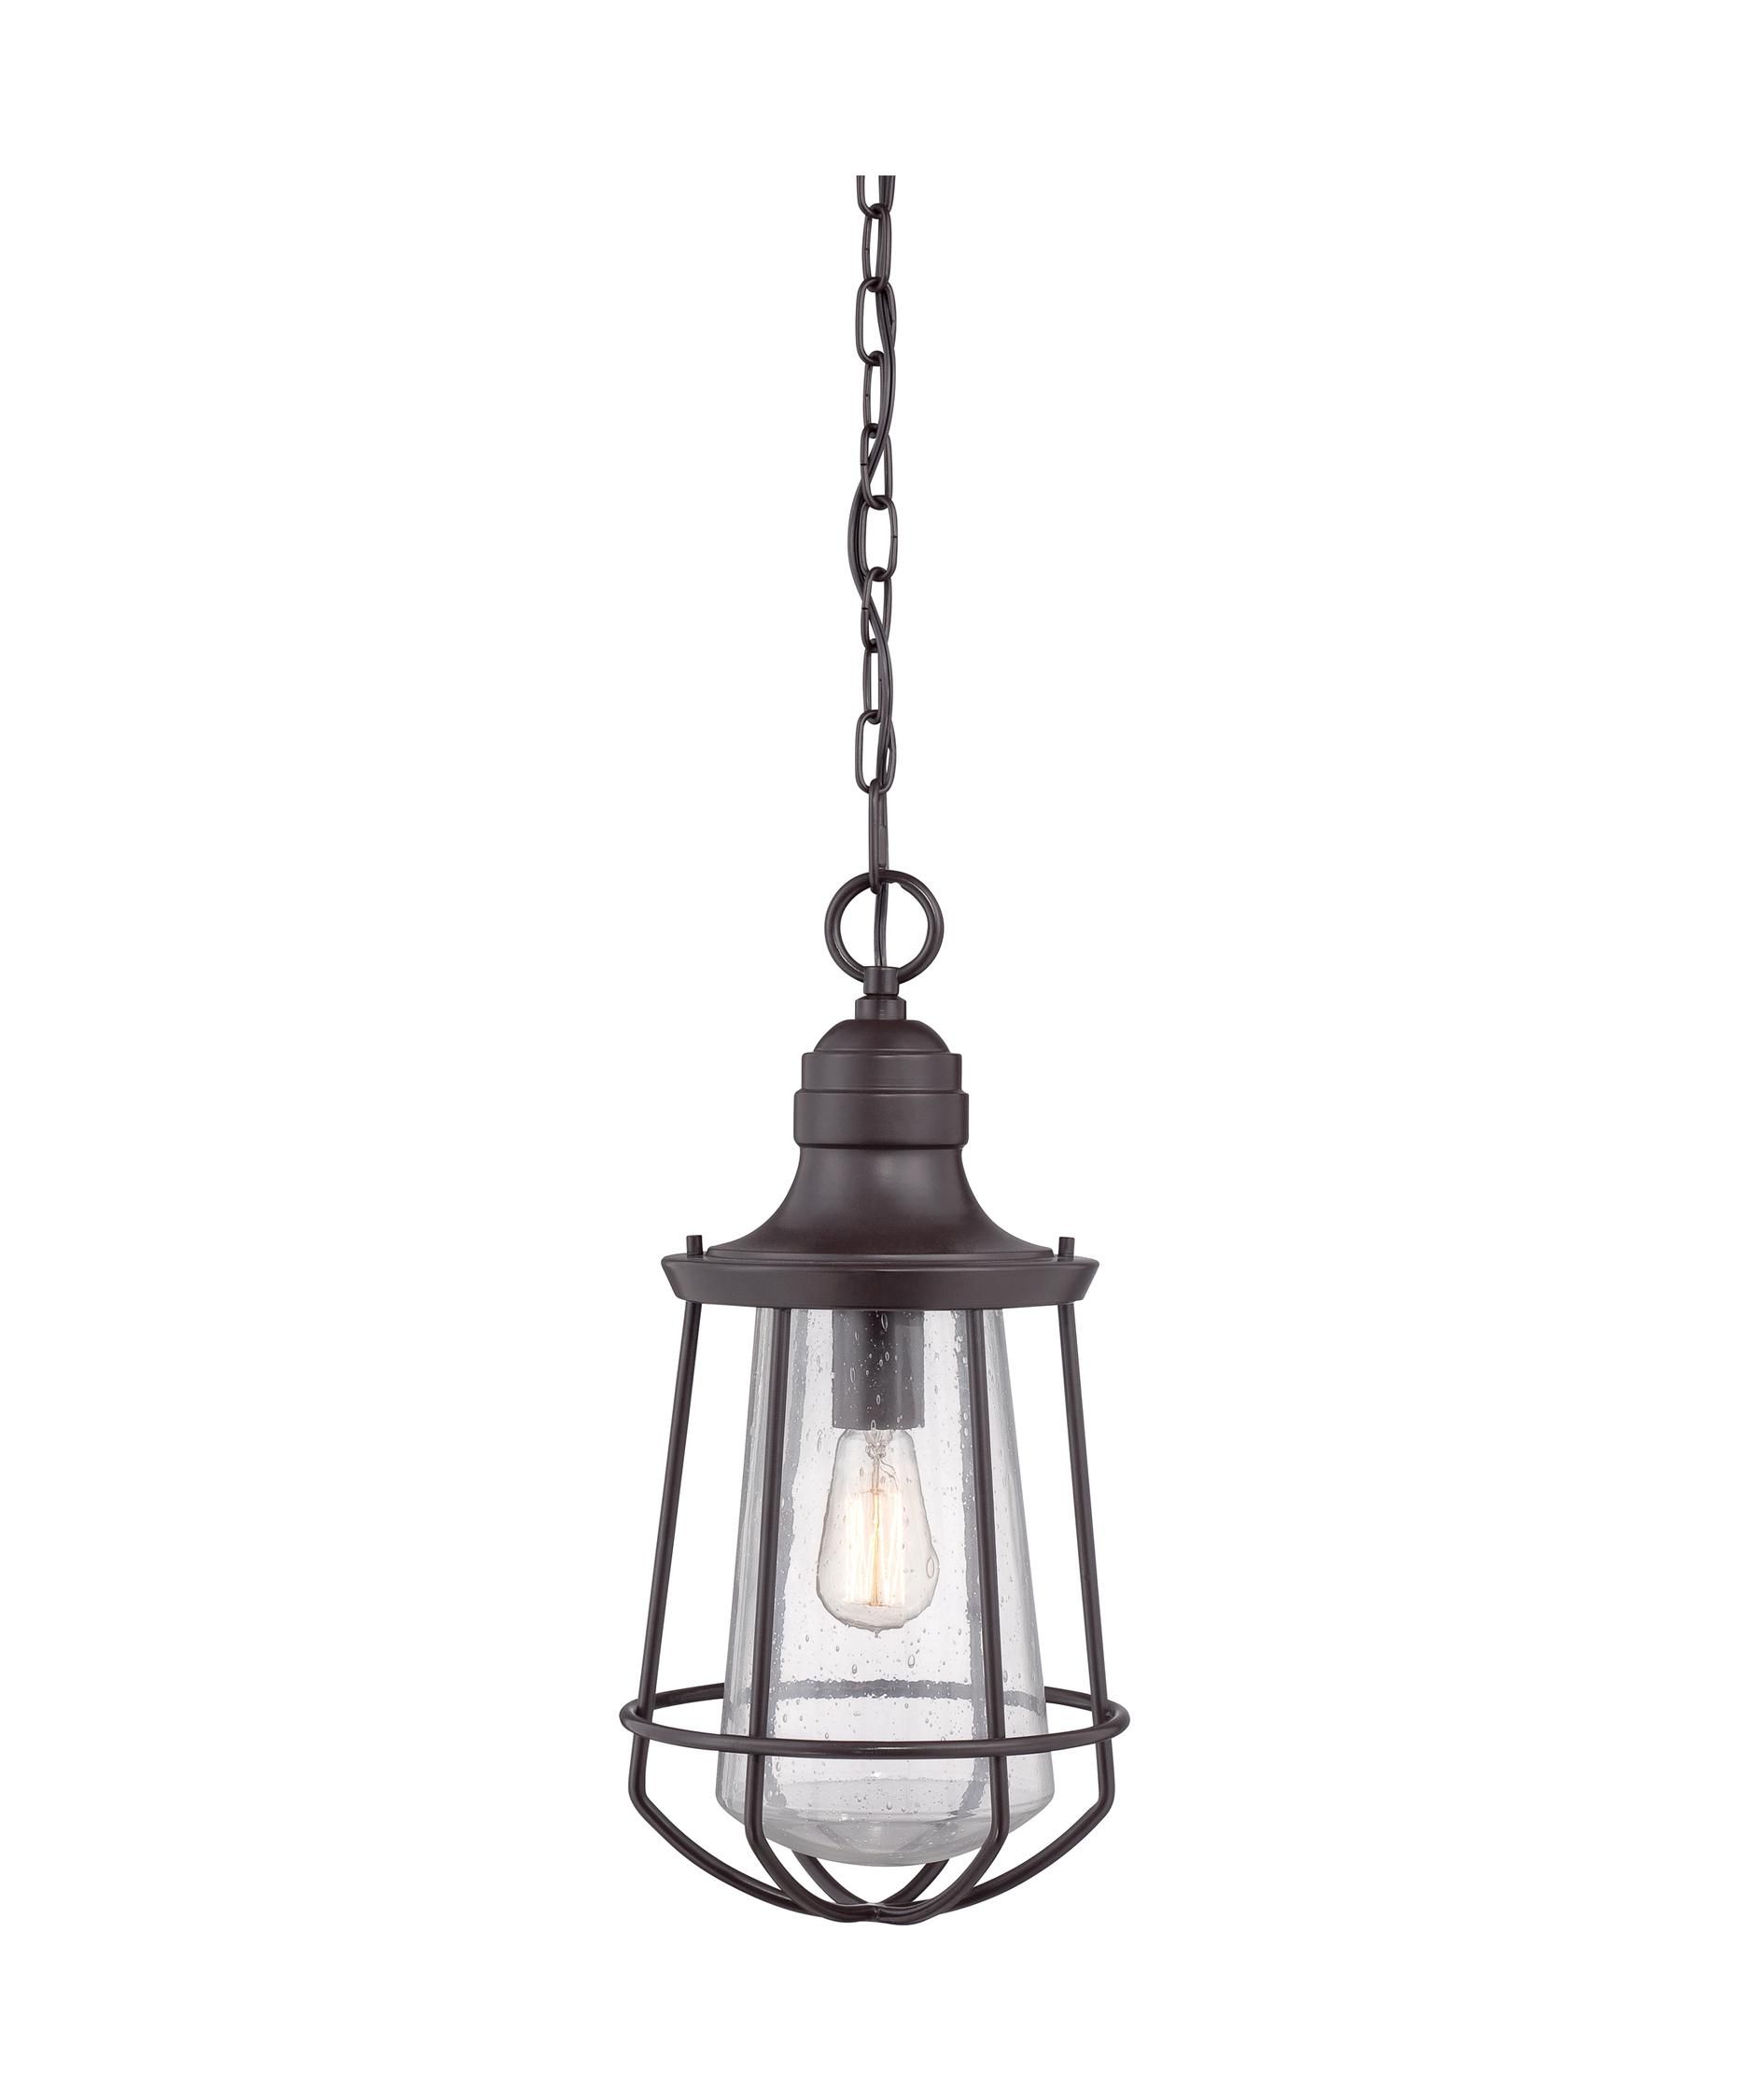 Quoizel Mre1909 Marine 10 Inch Wide 1 Light Outdoor Hanging Lantern Pertaining To Quoizel Outdoor Hanging Lights (Photo 2 of 15)